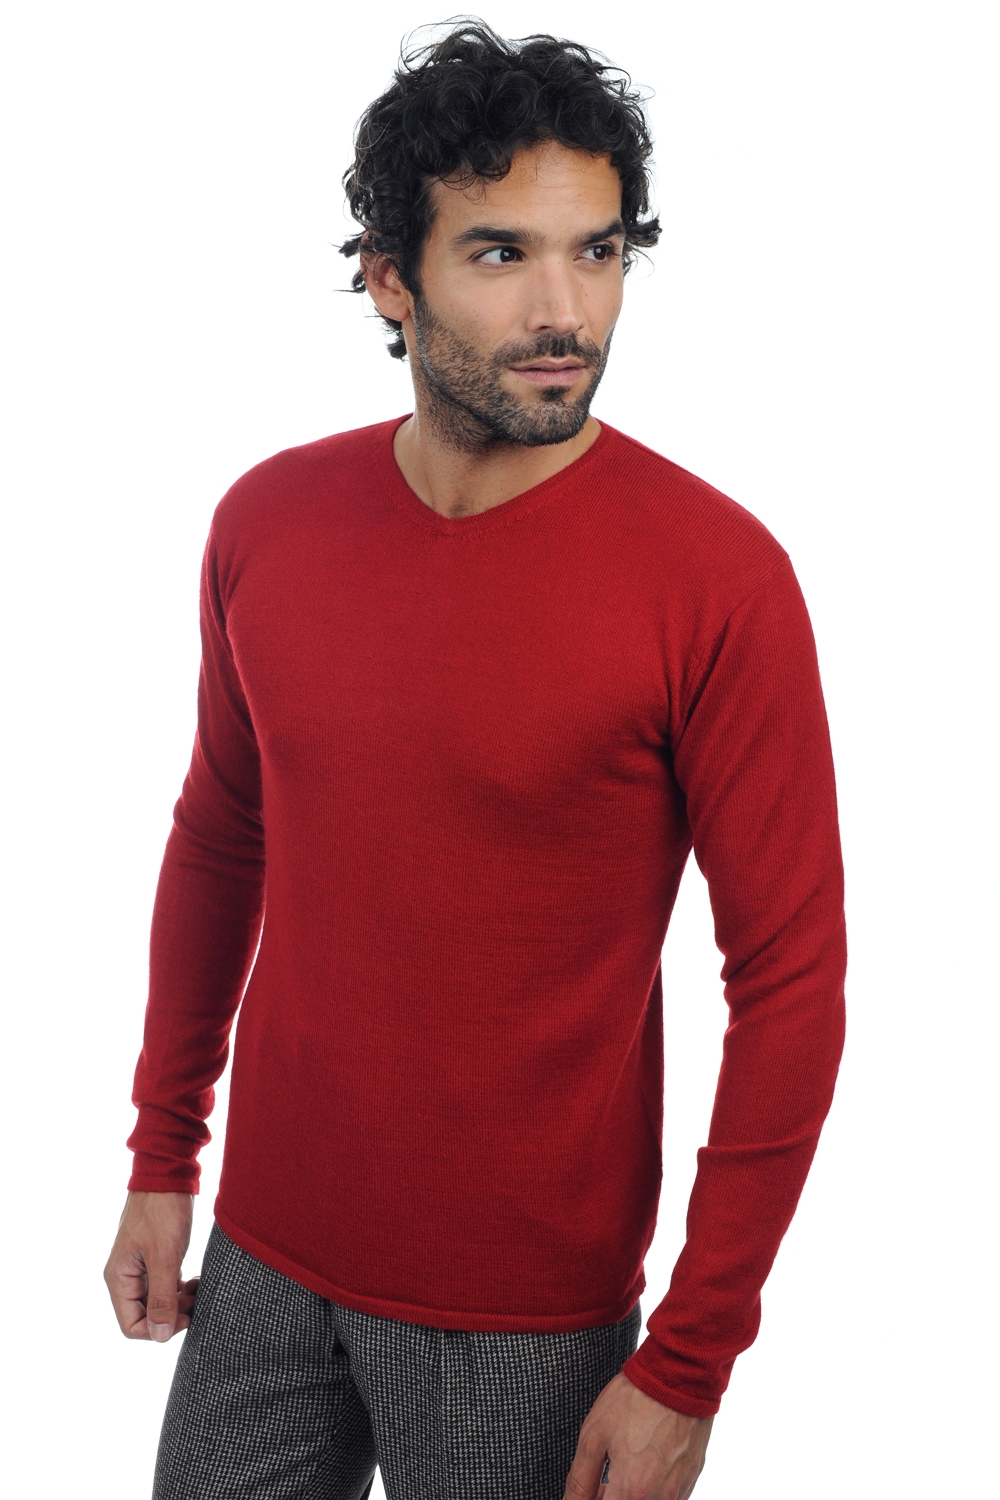 Baby Alpaga pull homme ethan rouge s